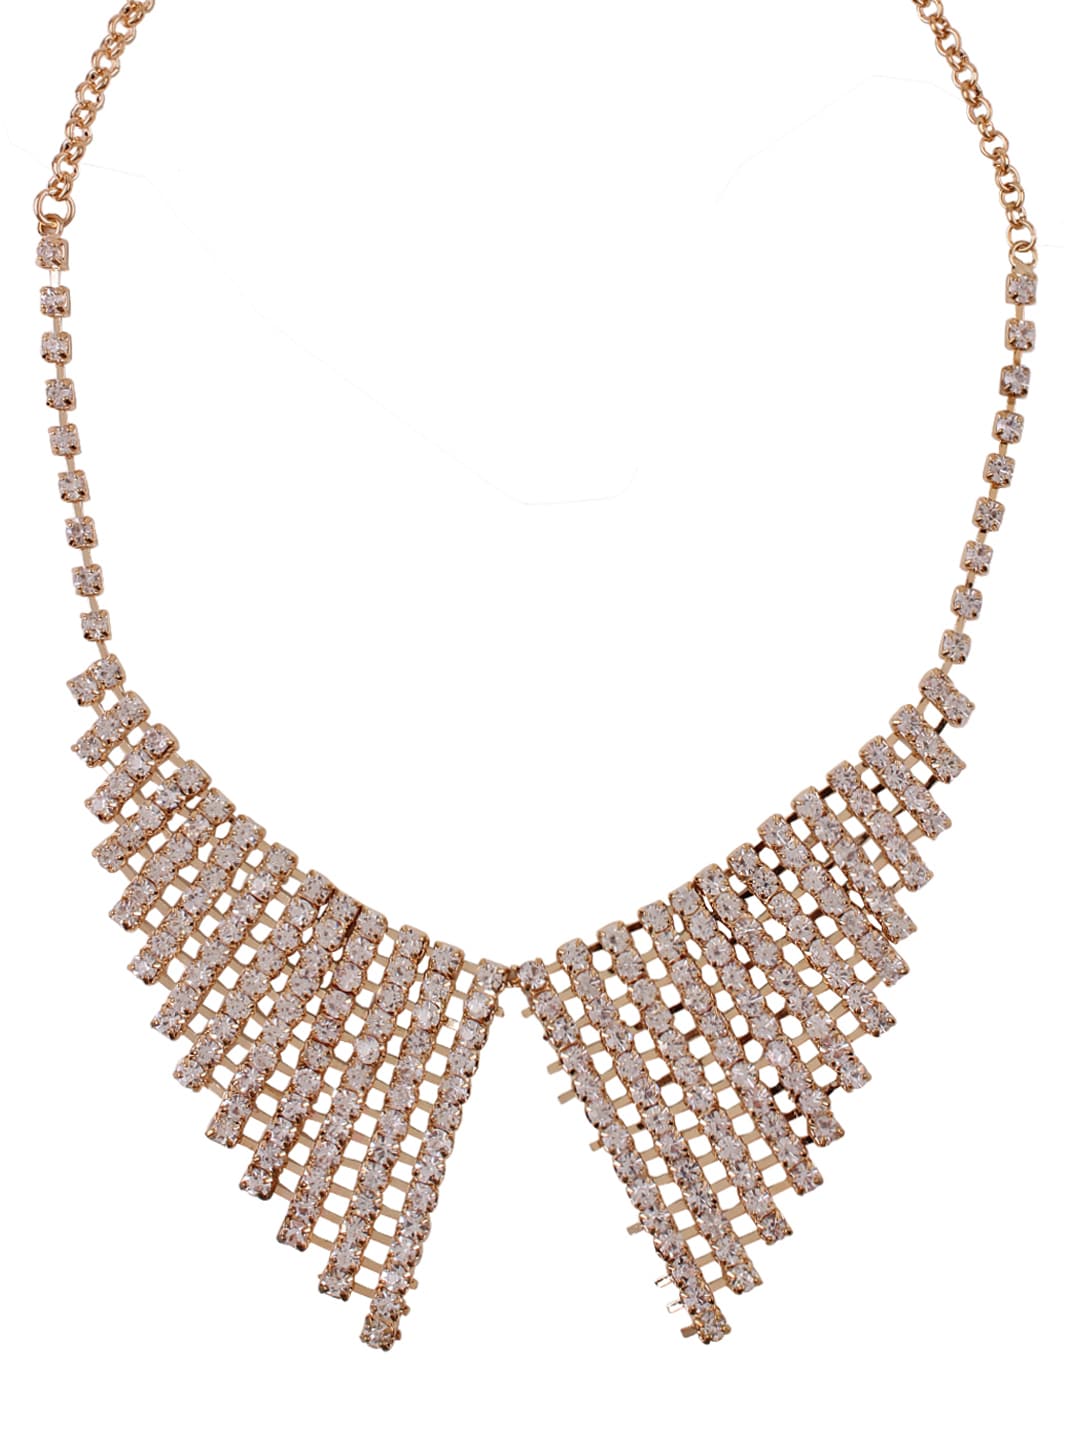 Shining Diva Fashion Gold-Toned Necklace Price in India